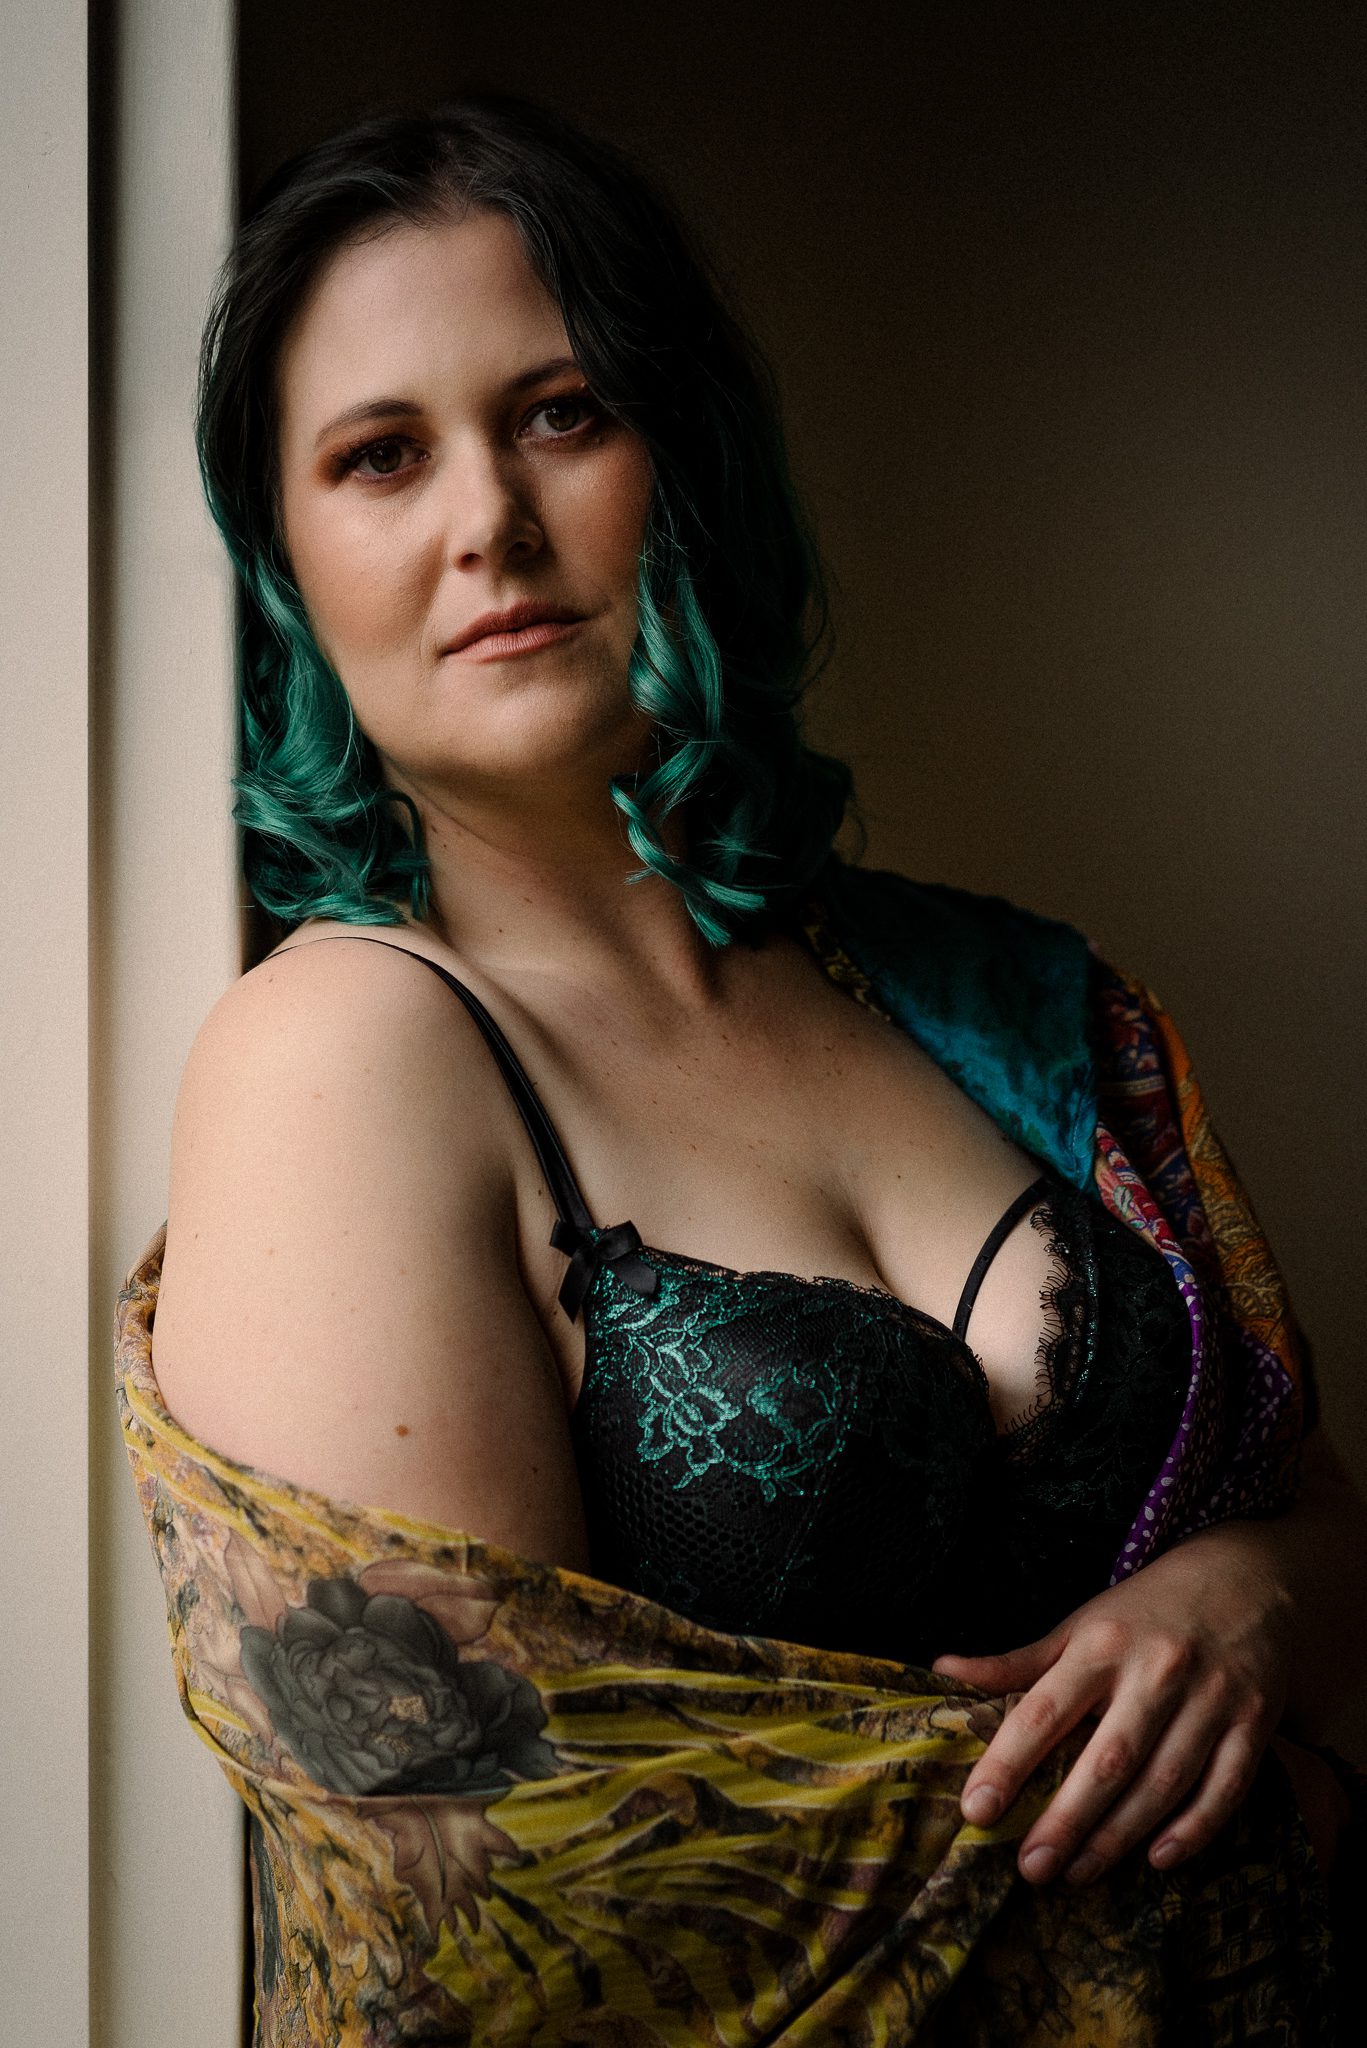 Boudoir portrait of a lady with green hair and bra, wrapped in a bright shawl